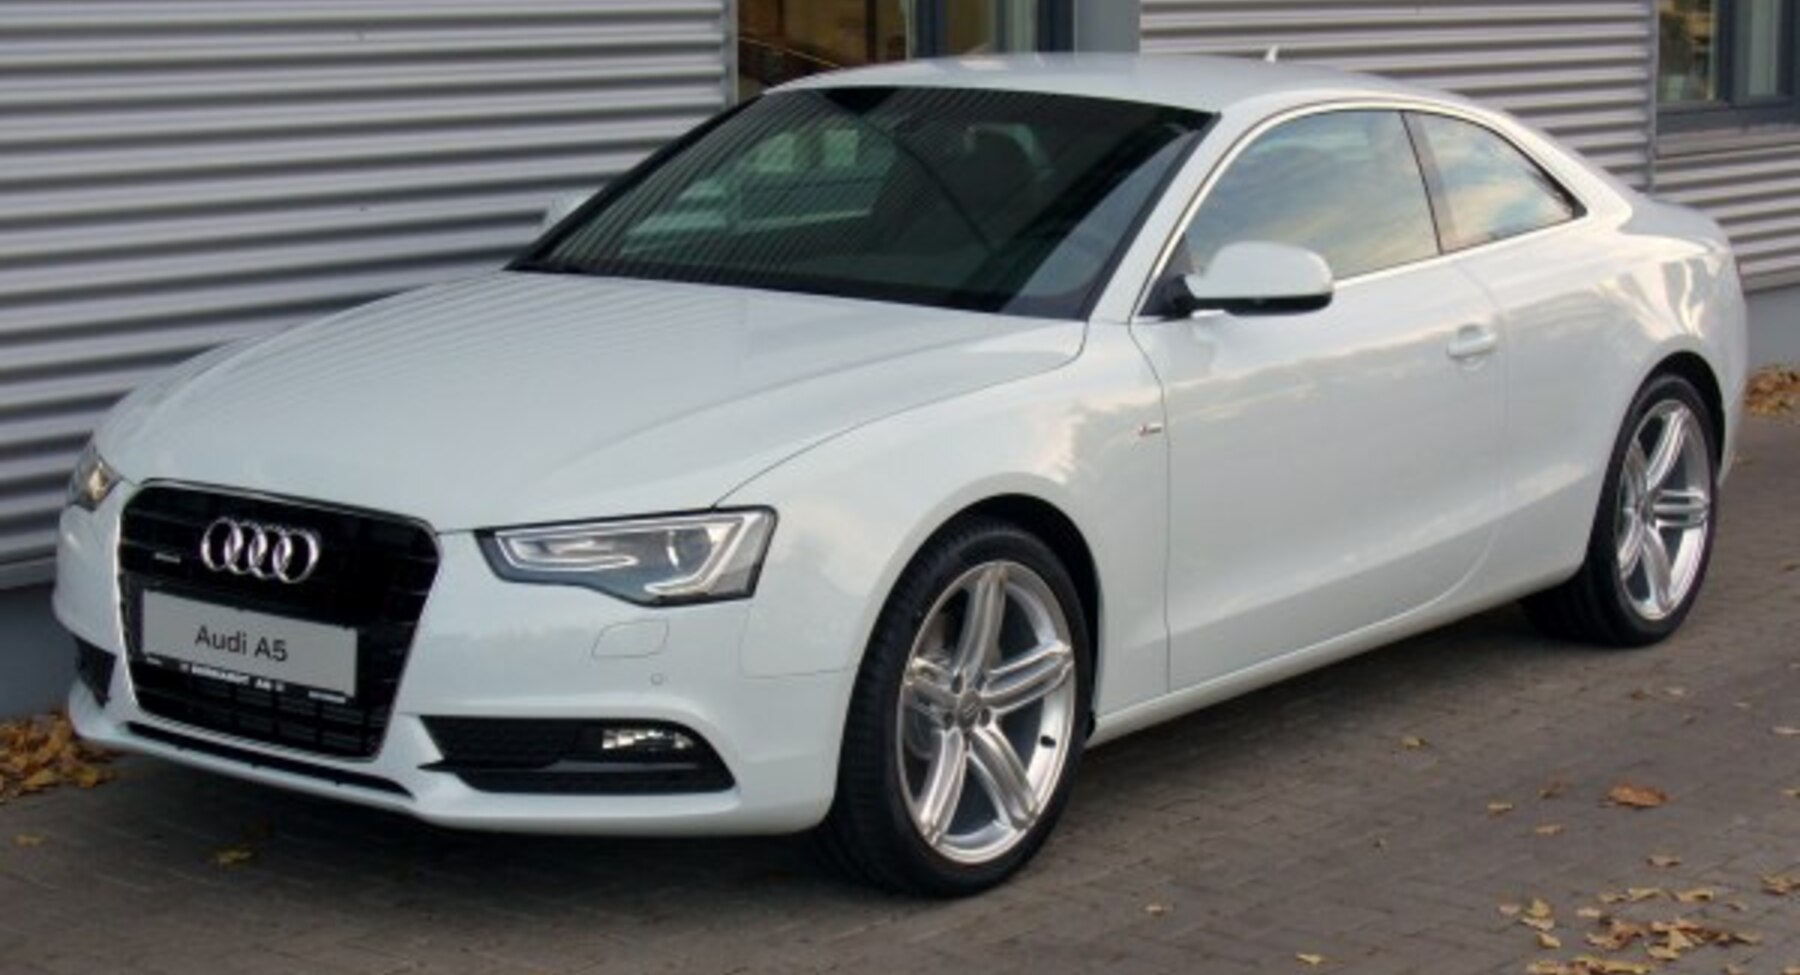 Audi A5 Coupe (8T3, facelift 2011) 2.0 TDI clean diesel (190 Hp) 2014, 2015, 2016 